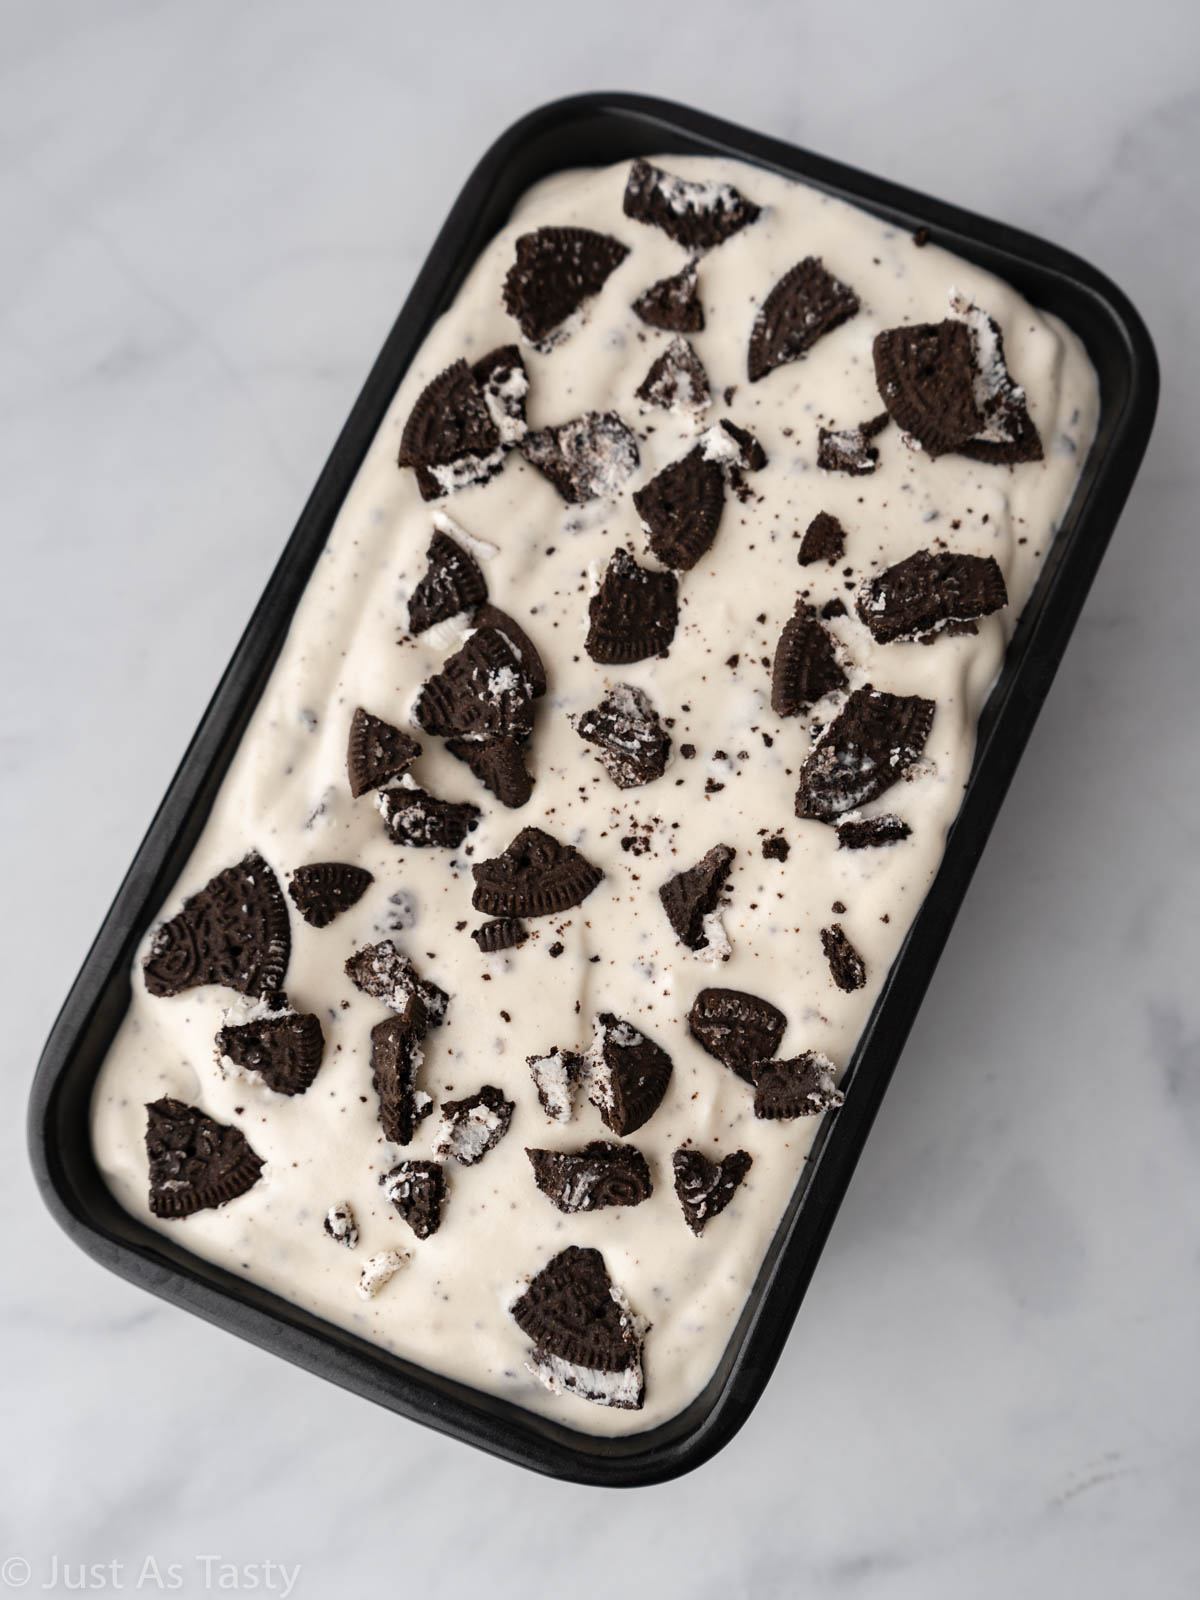 Ice cream topped with Oreo pieces in a loaf pan.